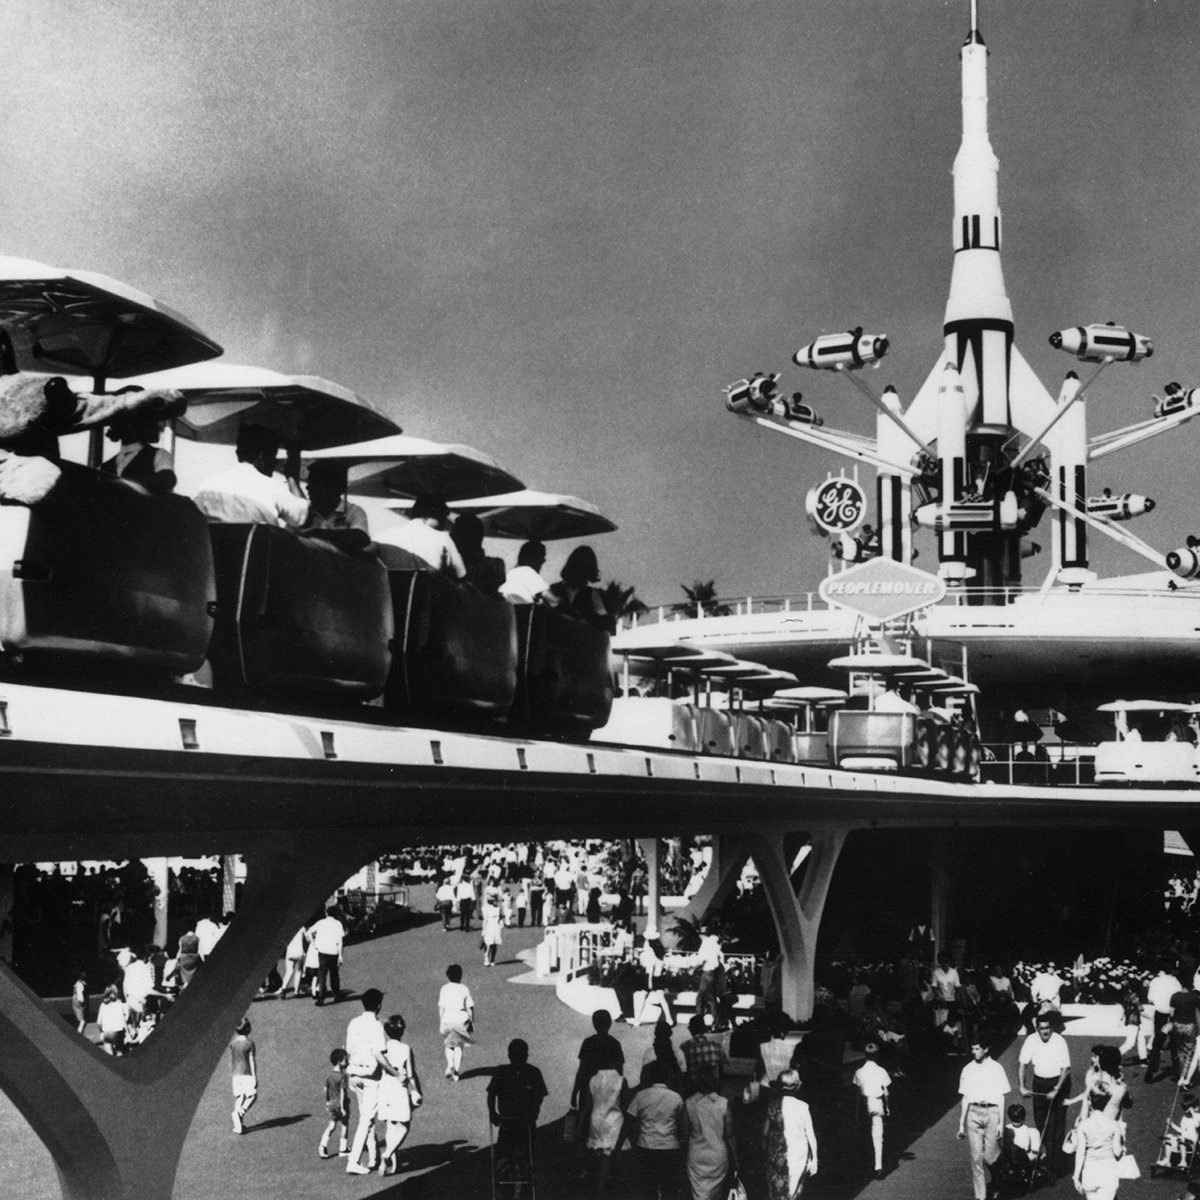 UNITED STATES - JANUARY 01: May 13, 1968 view of the California Disneyland, with its then-new PEOPLE MOVER ride in the background. (Photo by Keystone-France/Gamma-Keystone via Getty Images)